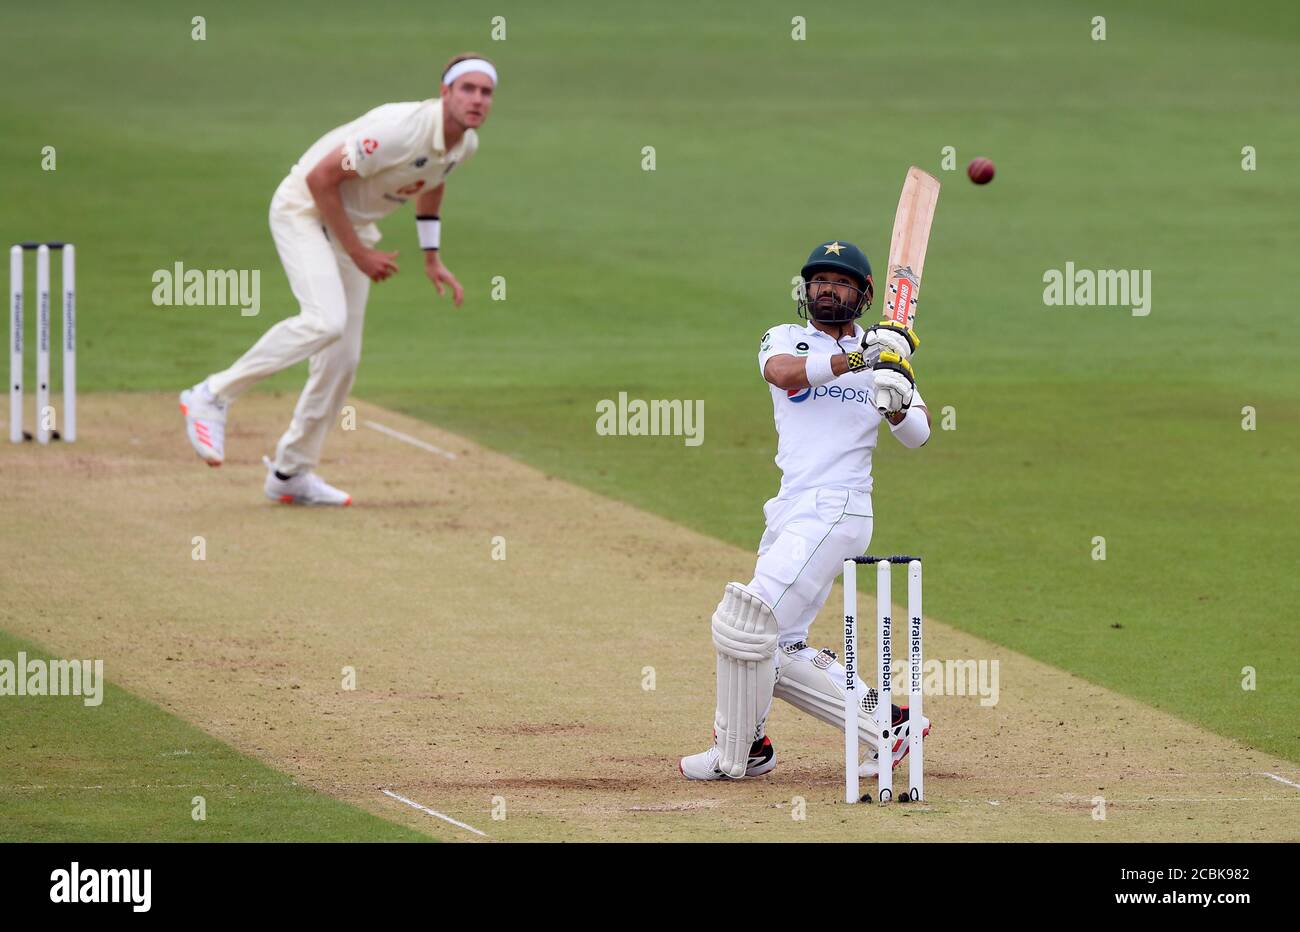 Pakistan's Mohammad Rizwan batting against the bowling of England's Stuart Broad (left) during day two of the Second Test match at the Ageas Bowl, Southampton. Stock Photo